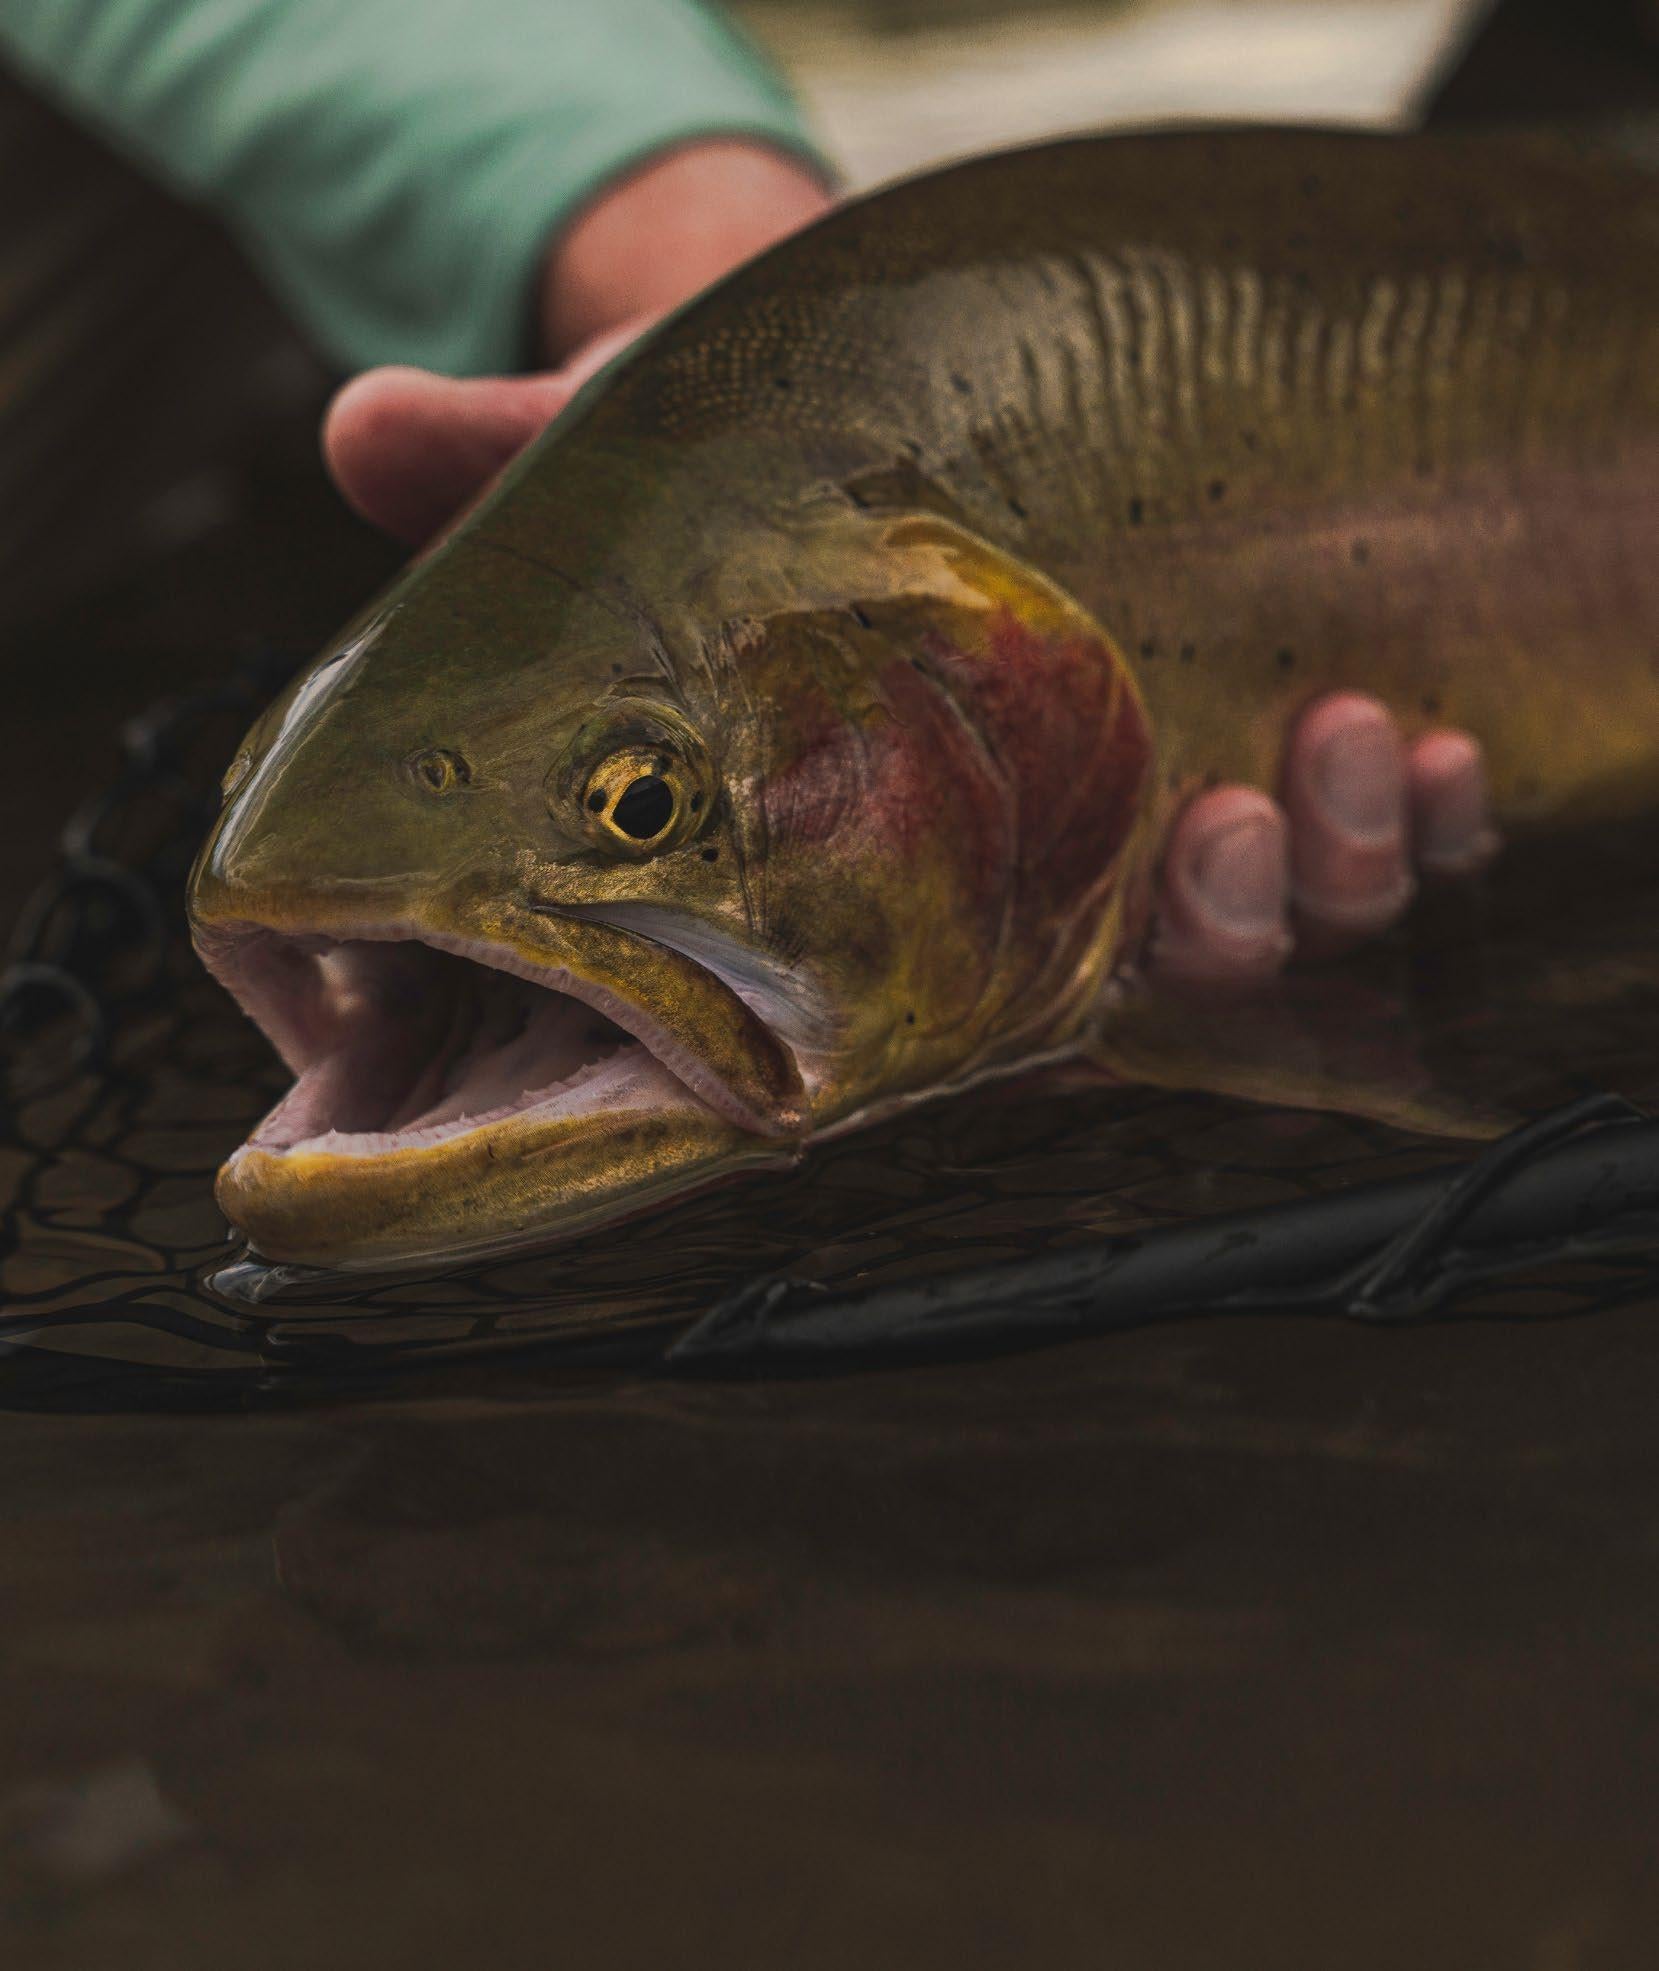 Article from: In the Loop Fly Fishing Magazine - Issue 35